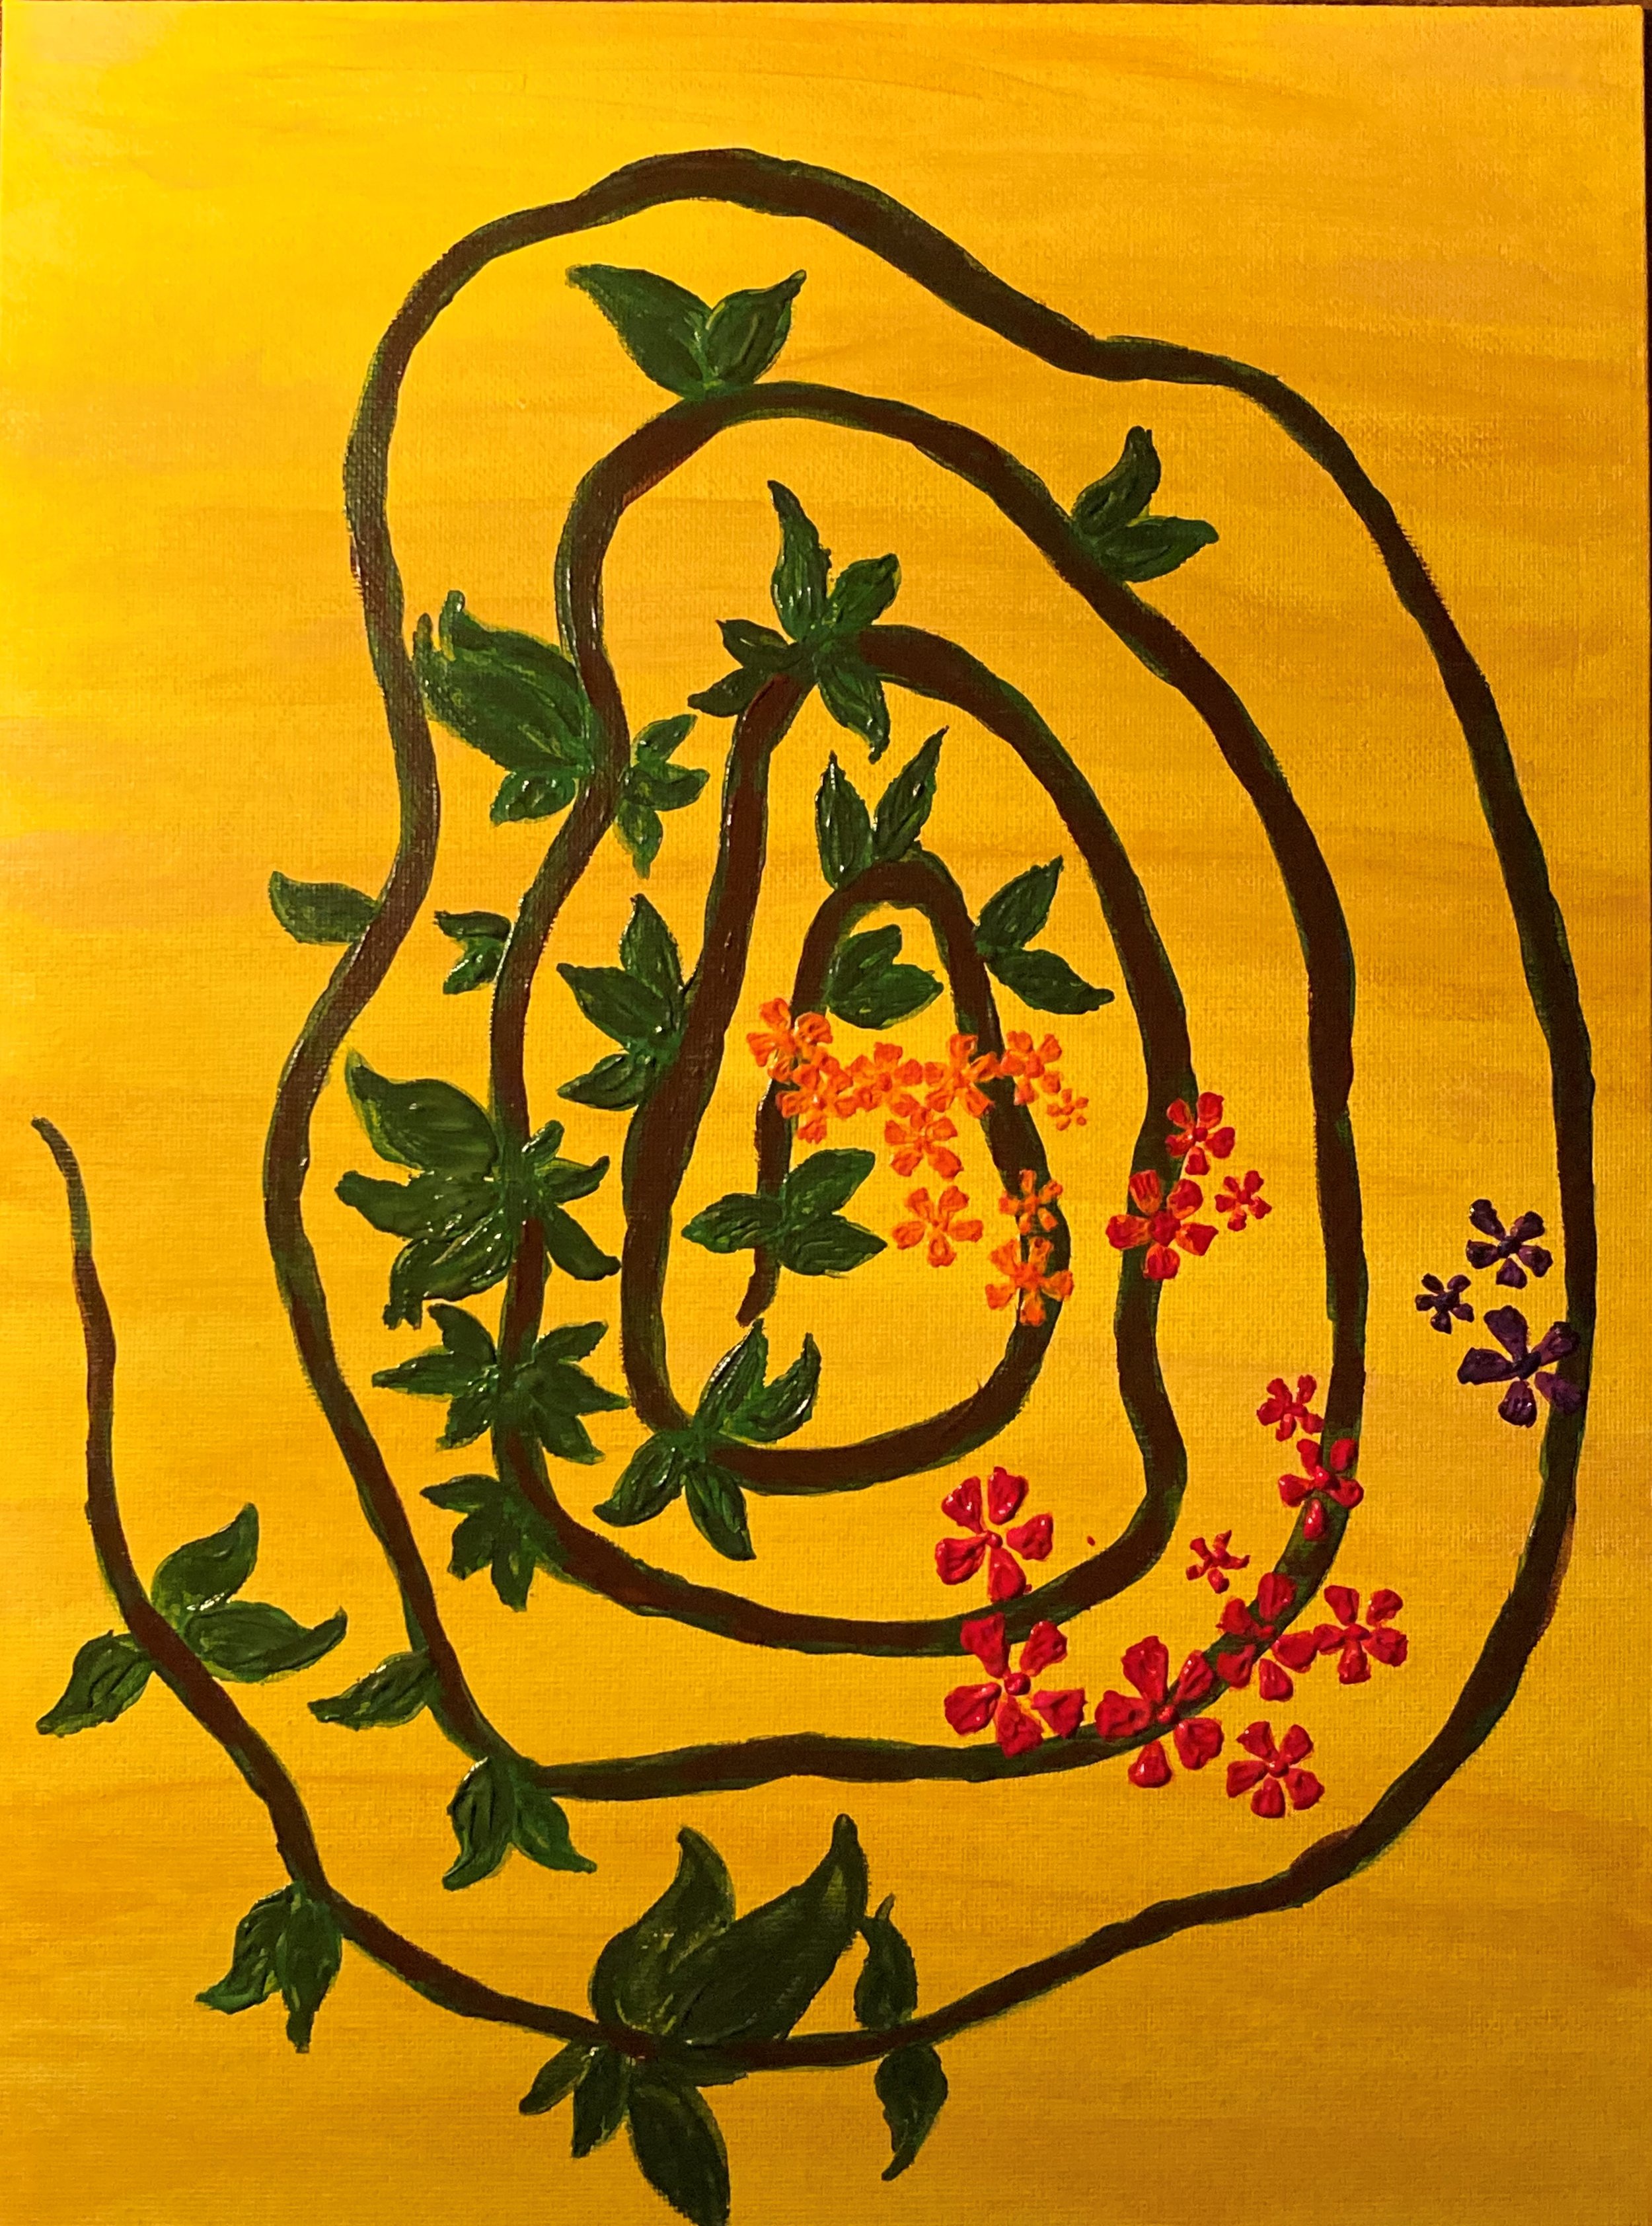  A painting of a spiraled vine with leaves and clusters of orange, red, pink, and purple flowers on a yellow background, representing a design process over time. 